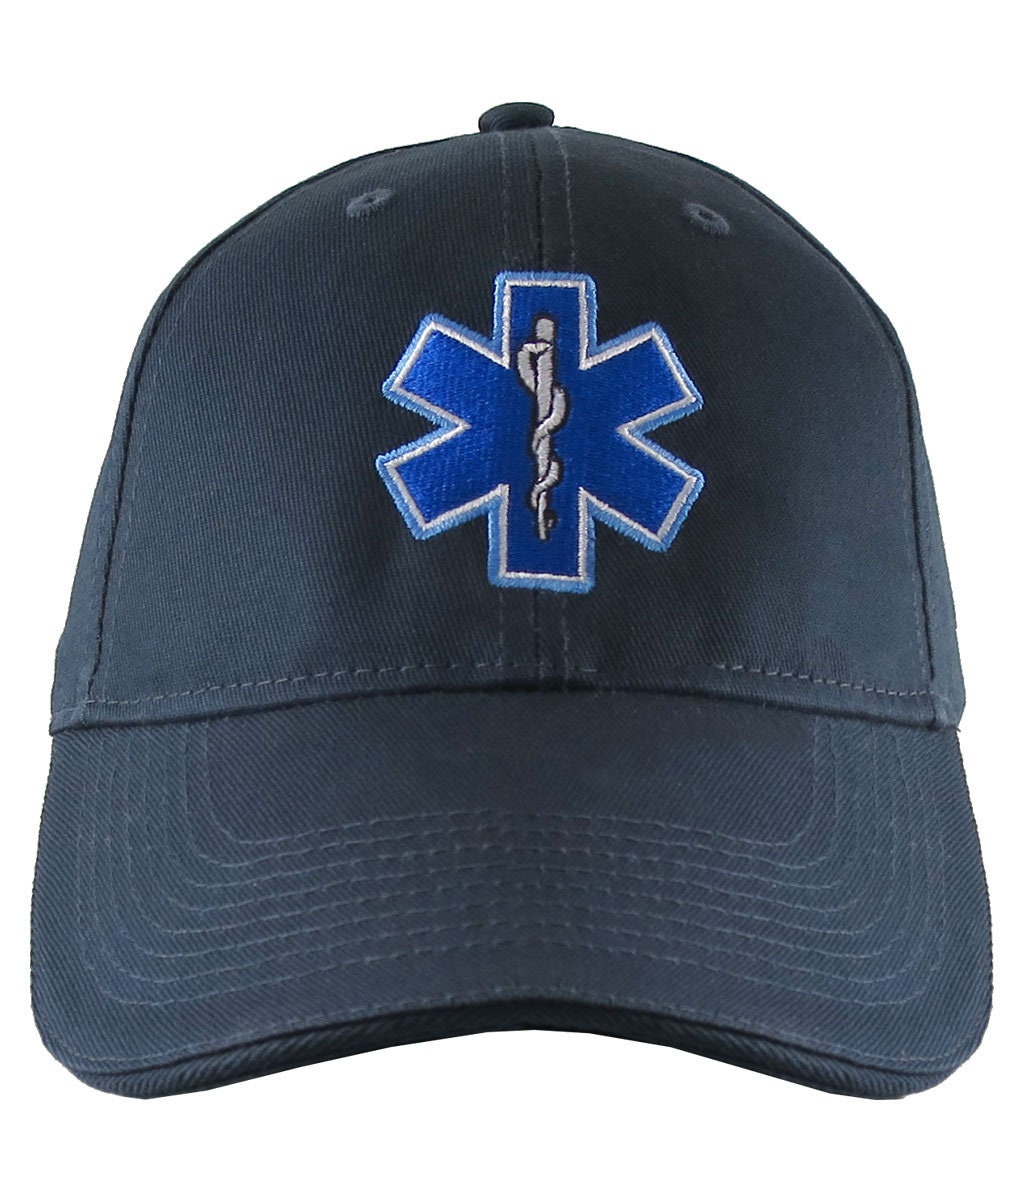 Paramedic EMT EMS Star of Life Embroidery Reflective Trim Navy Blue Structured Adjustable Baseball Cap with Personalization Options